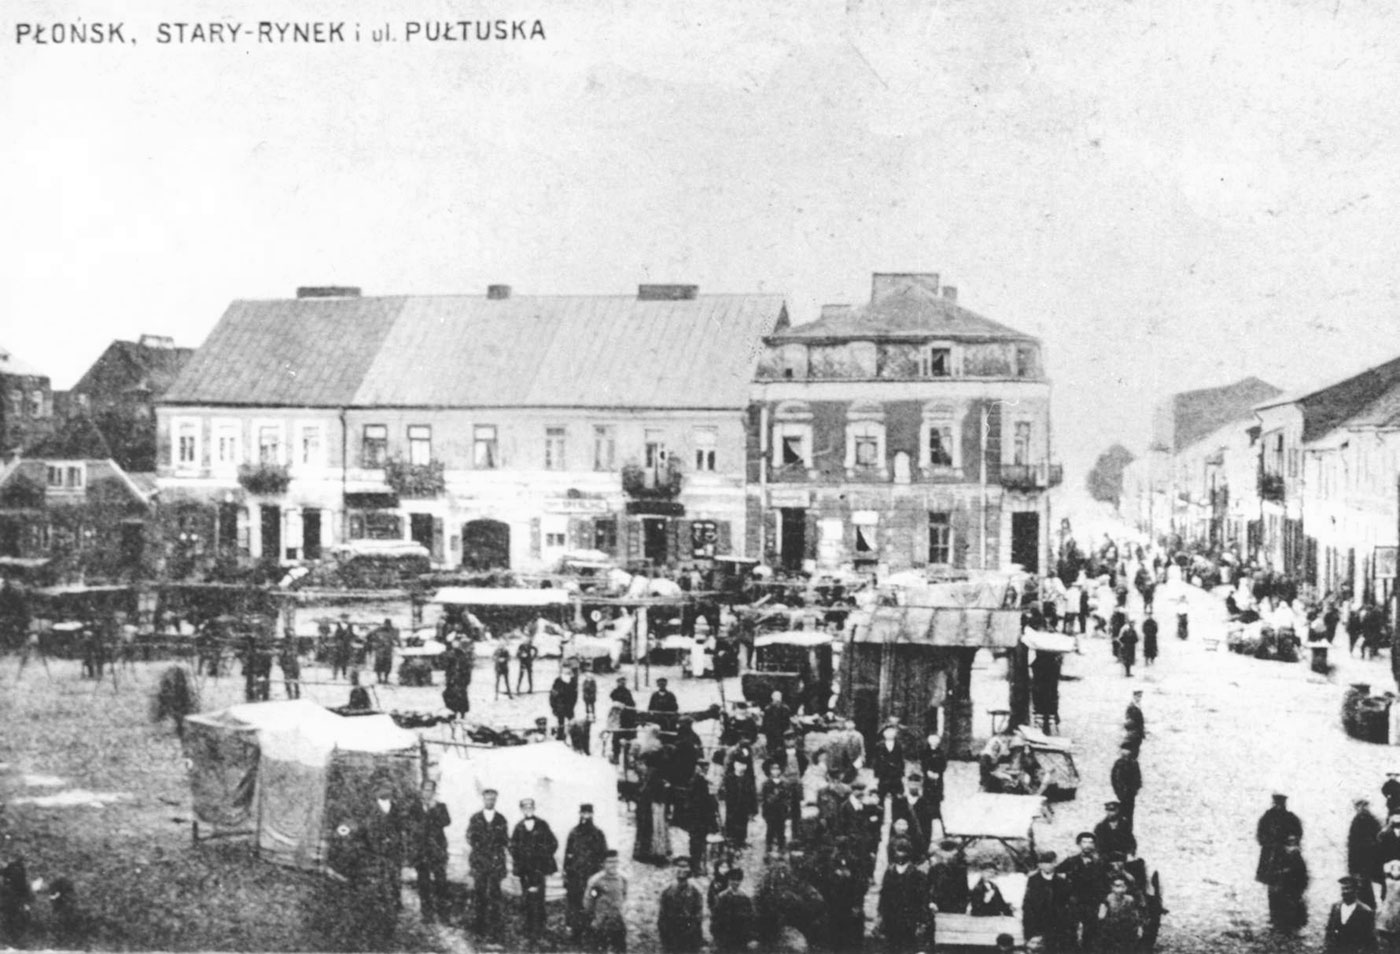 Market Days and Trade in Plonsk